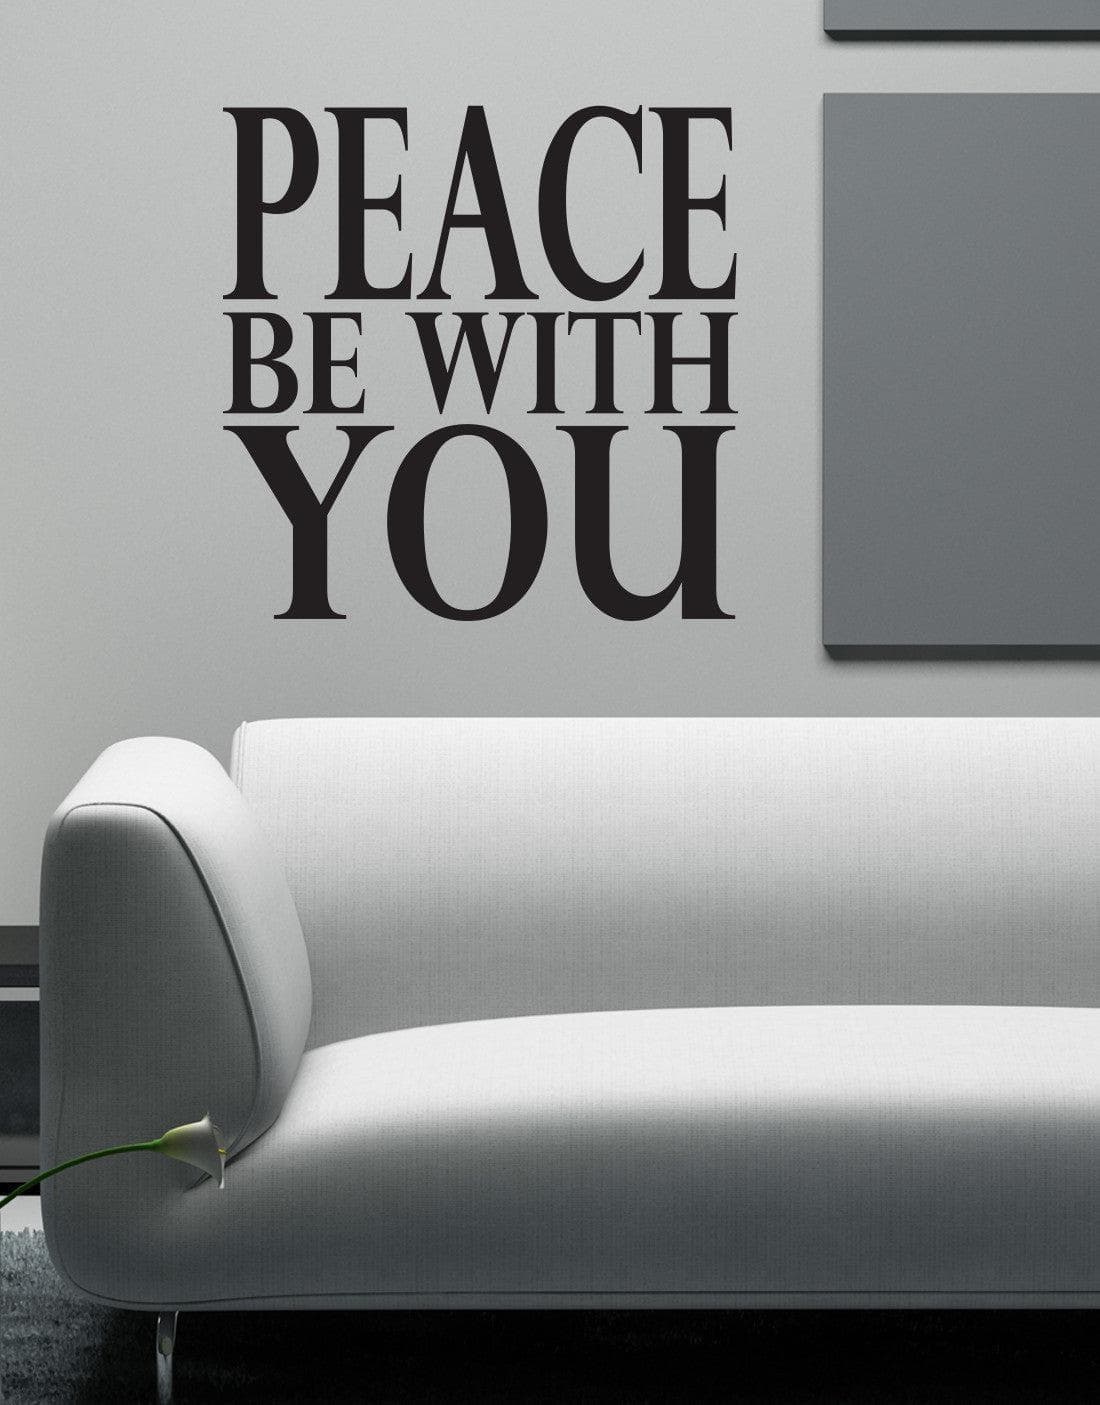 Vinyl Wall Decal Sticker Peace Be With You Quote #6004